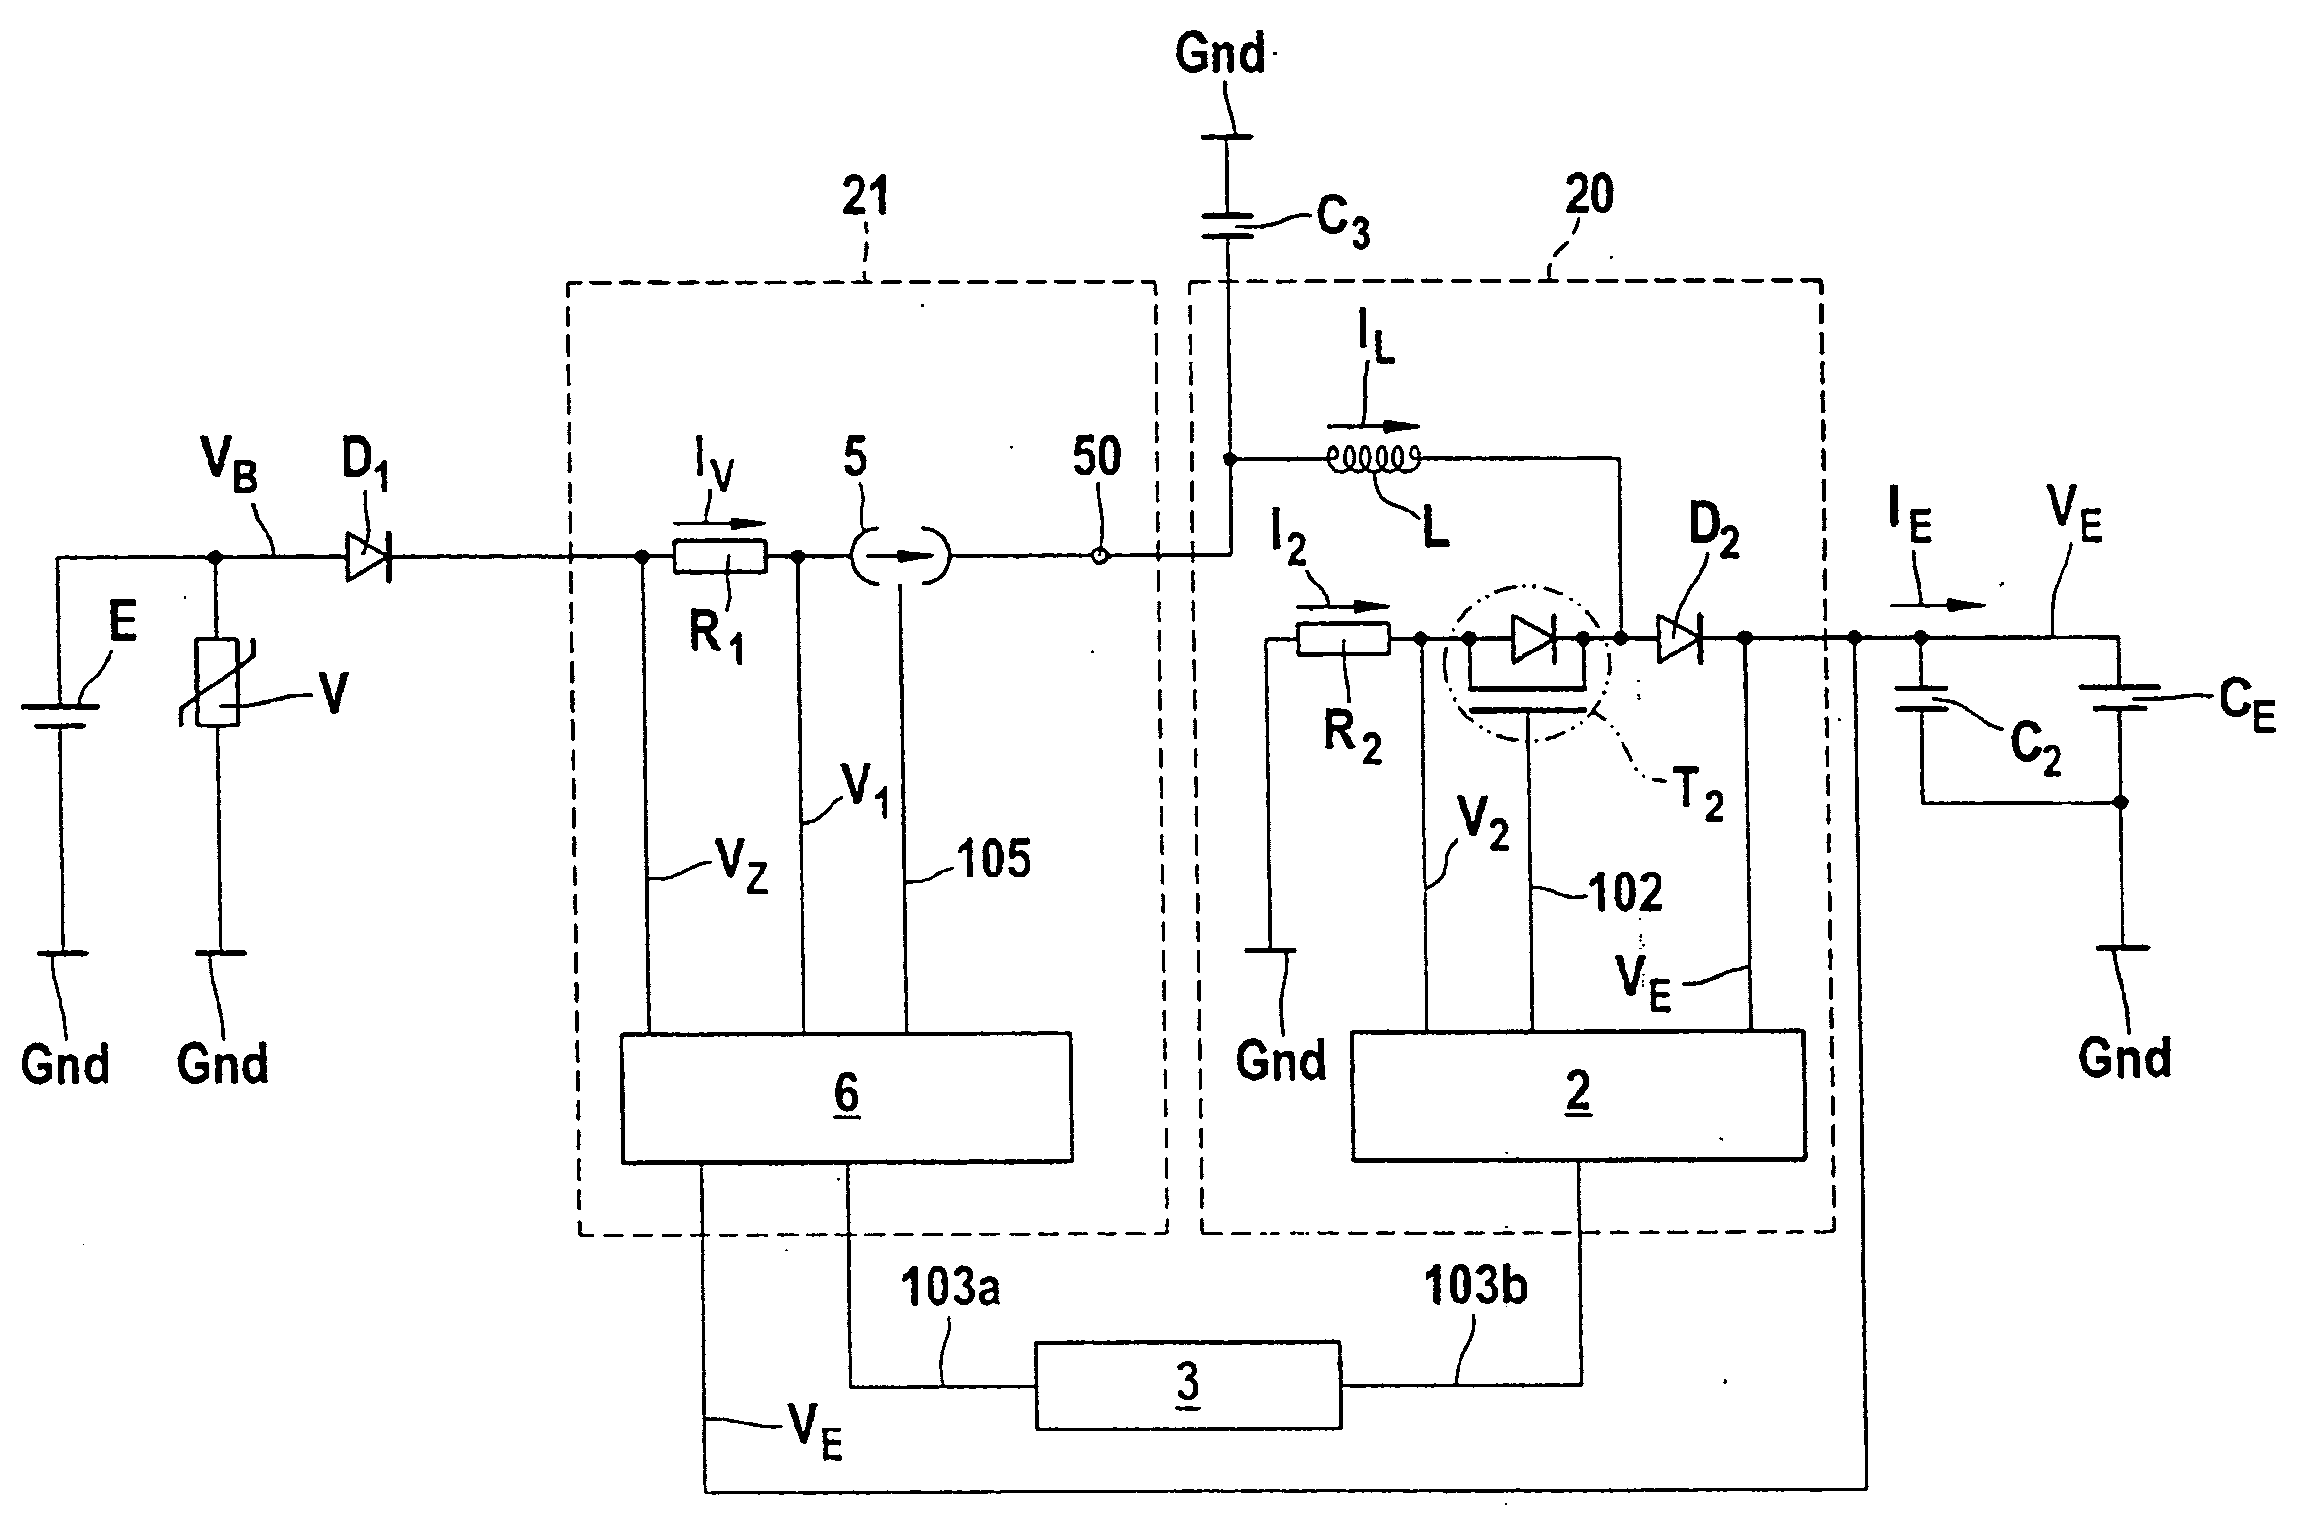 Device and Method For Charging an Electrical Energy Storage Device